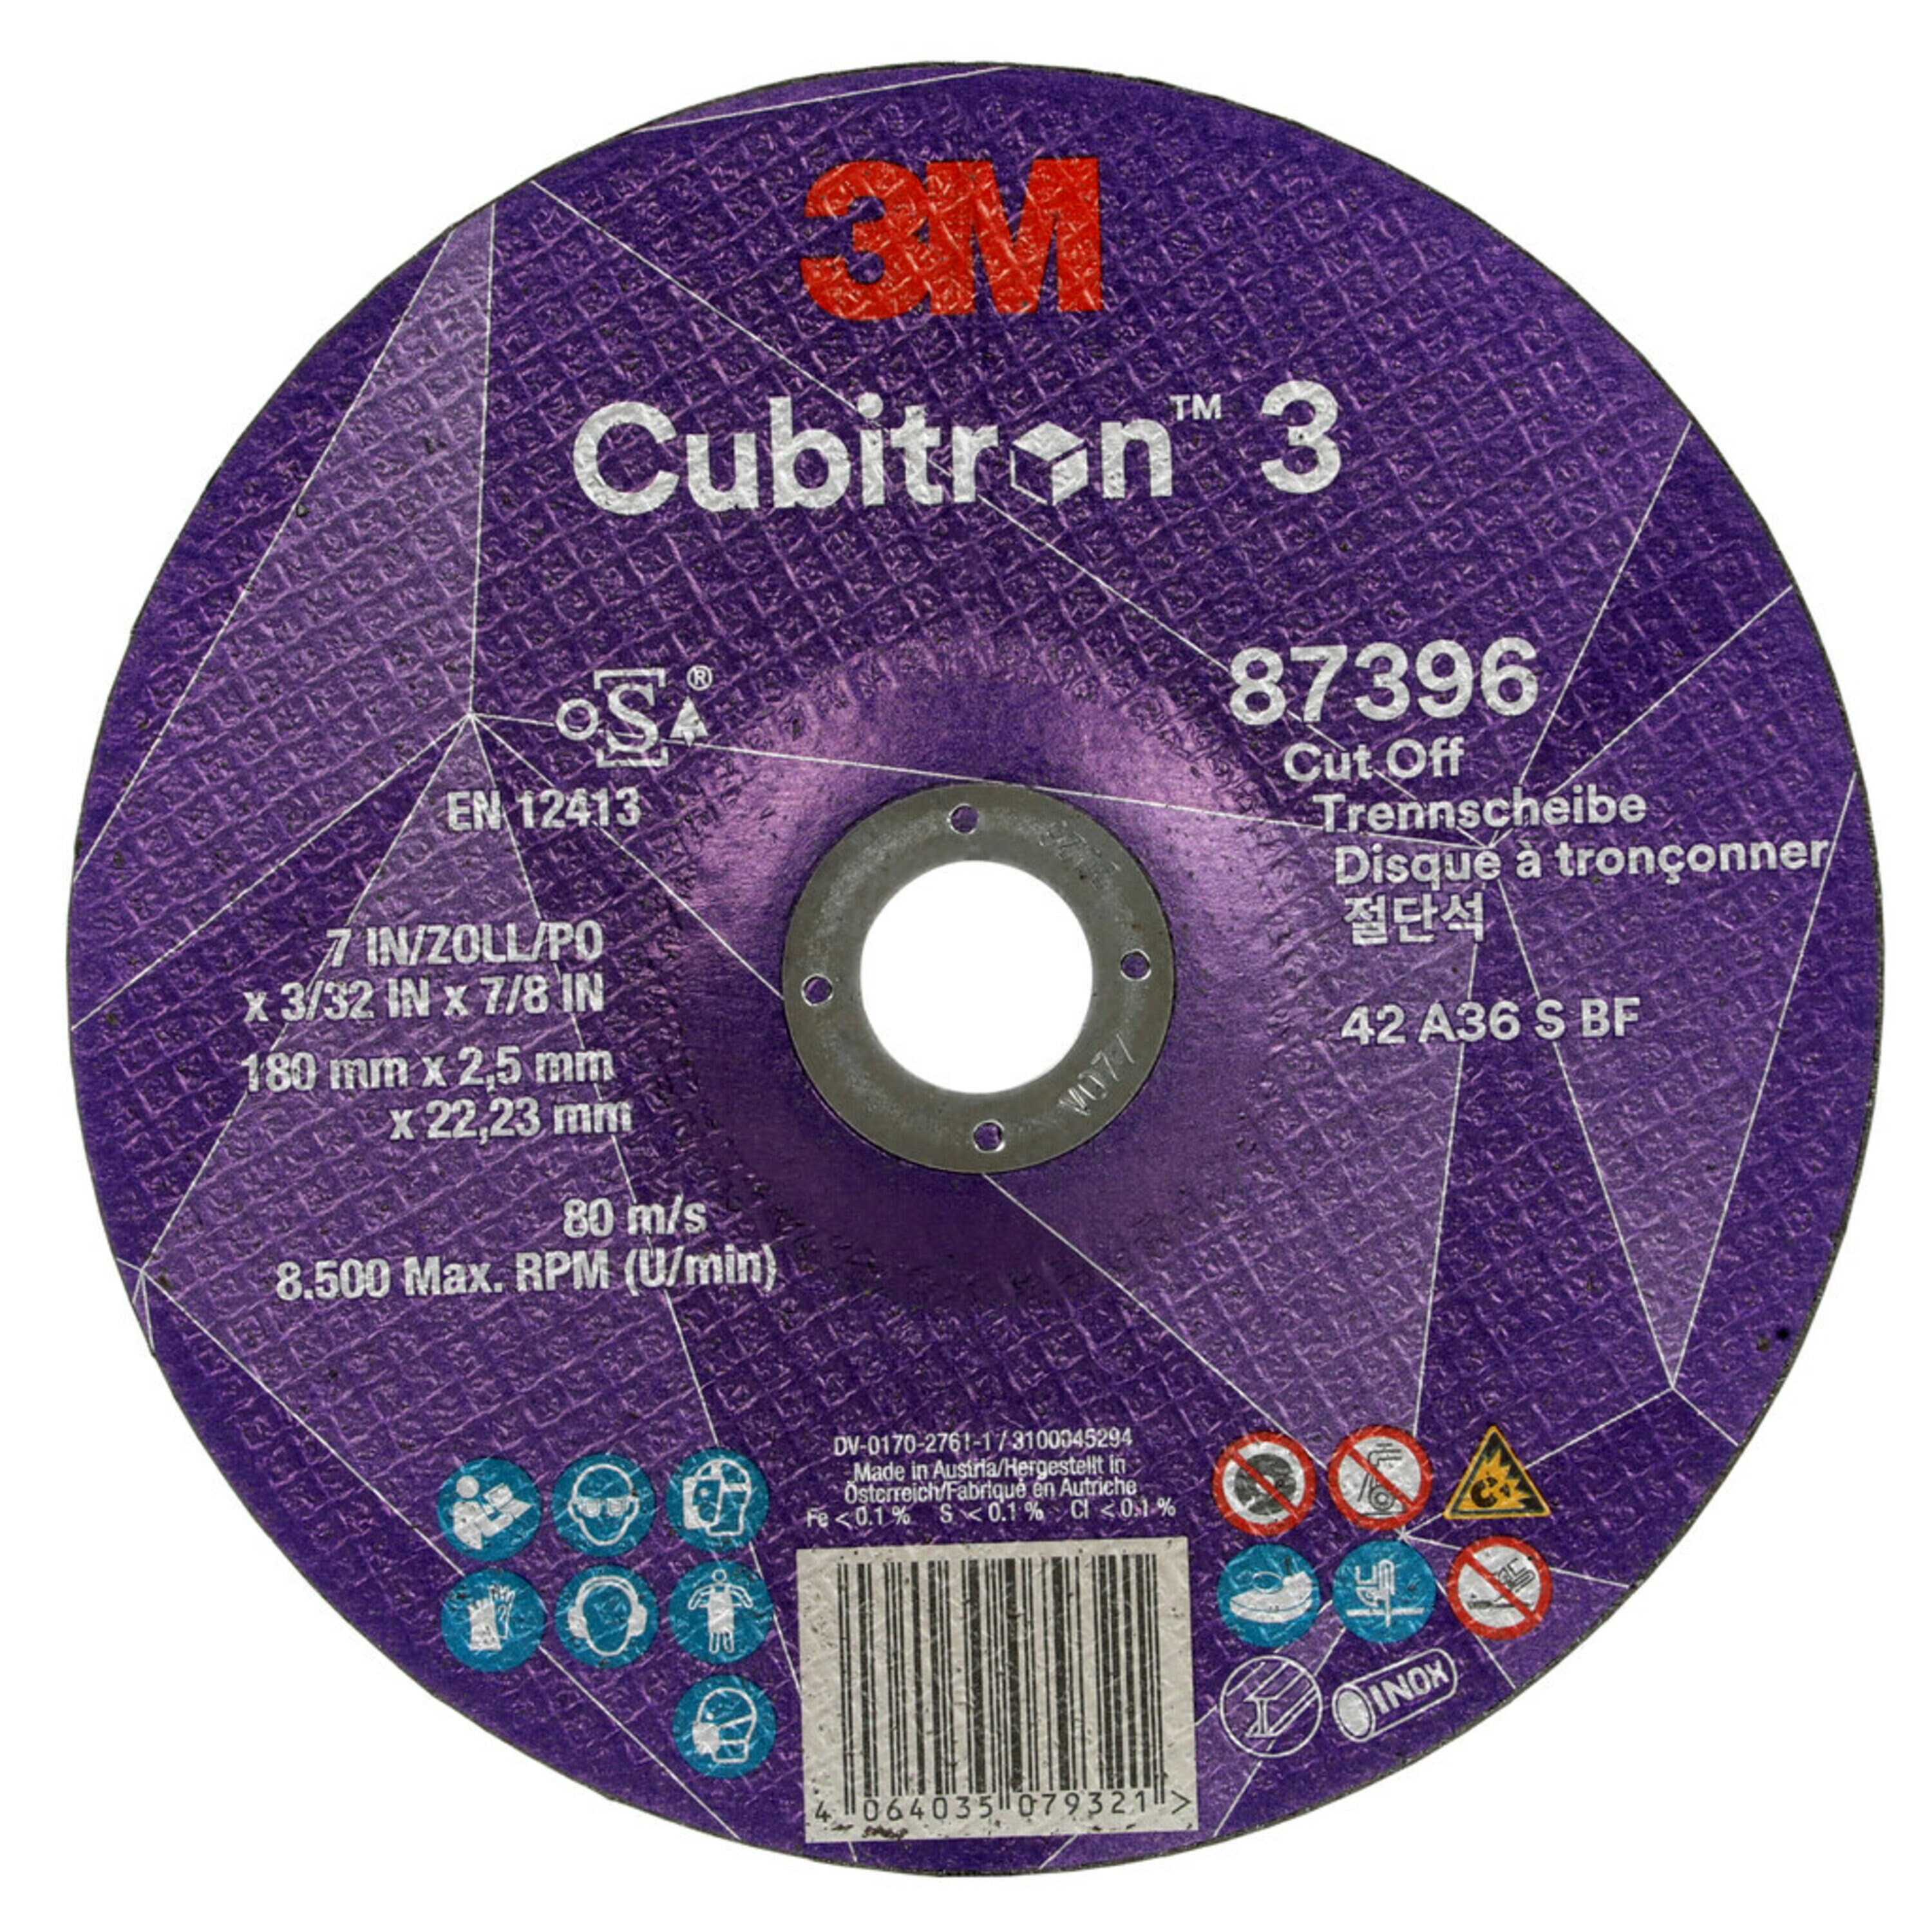 3M Cubitron 3, 180 mm, 2,5 mm, 22,23 mm, 36 , tipo 42 #87396